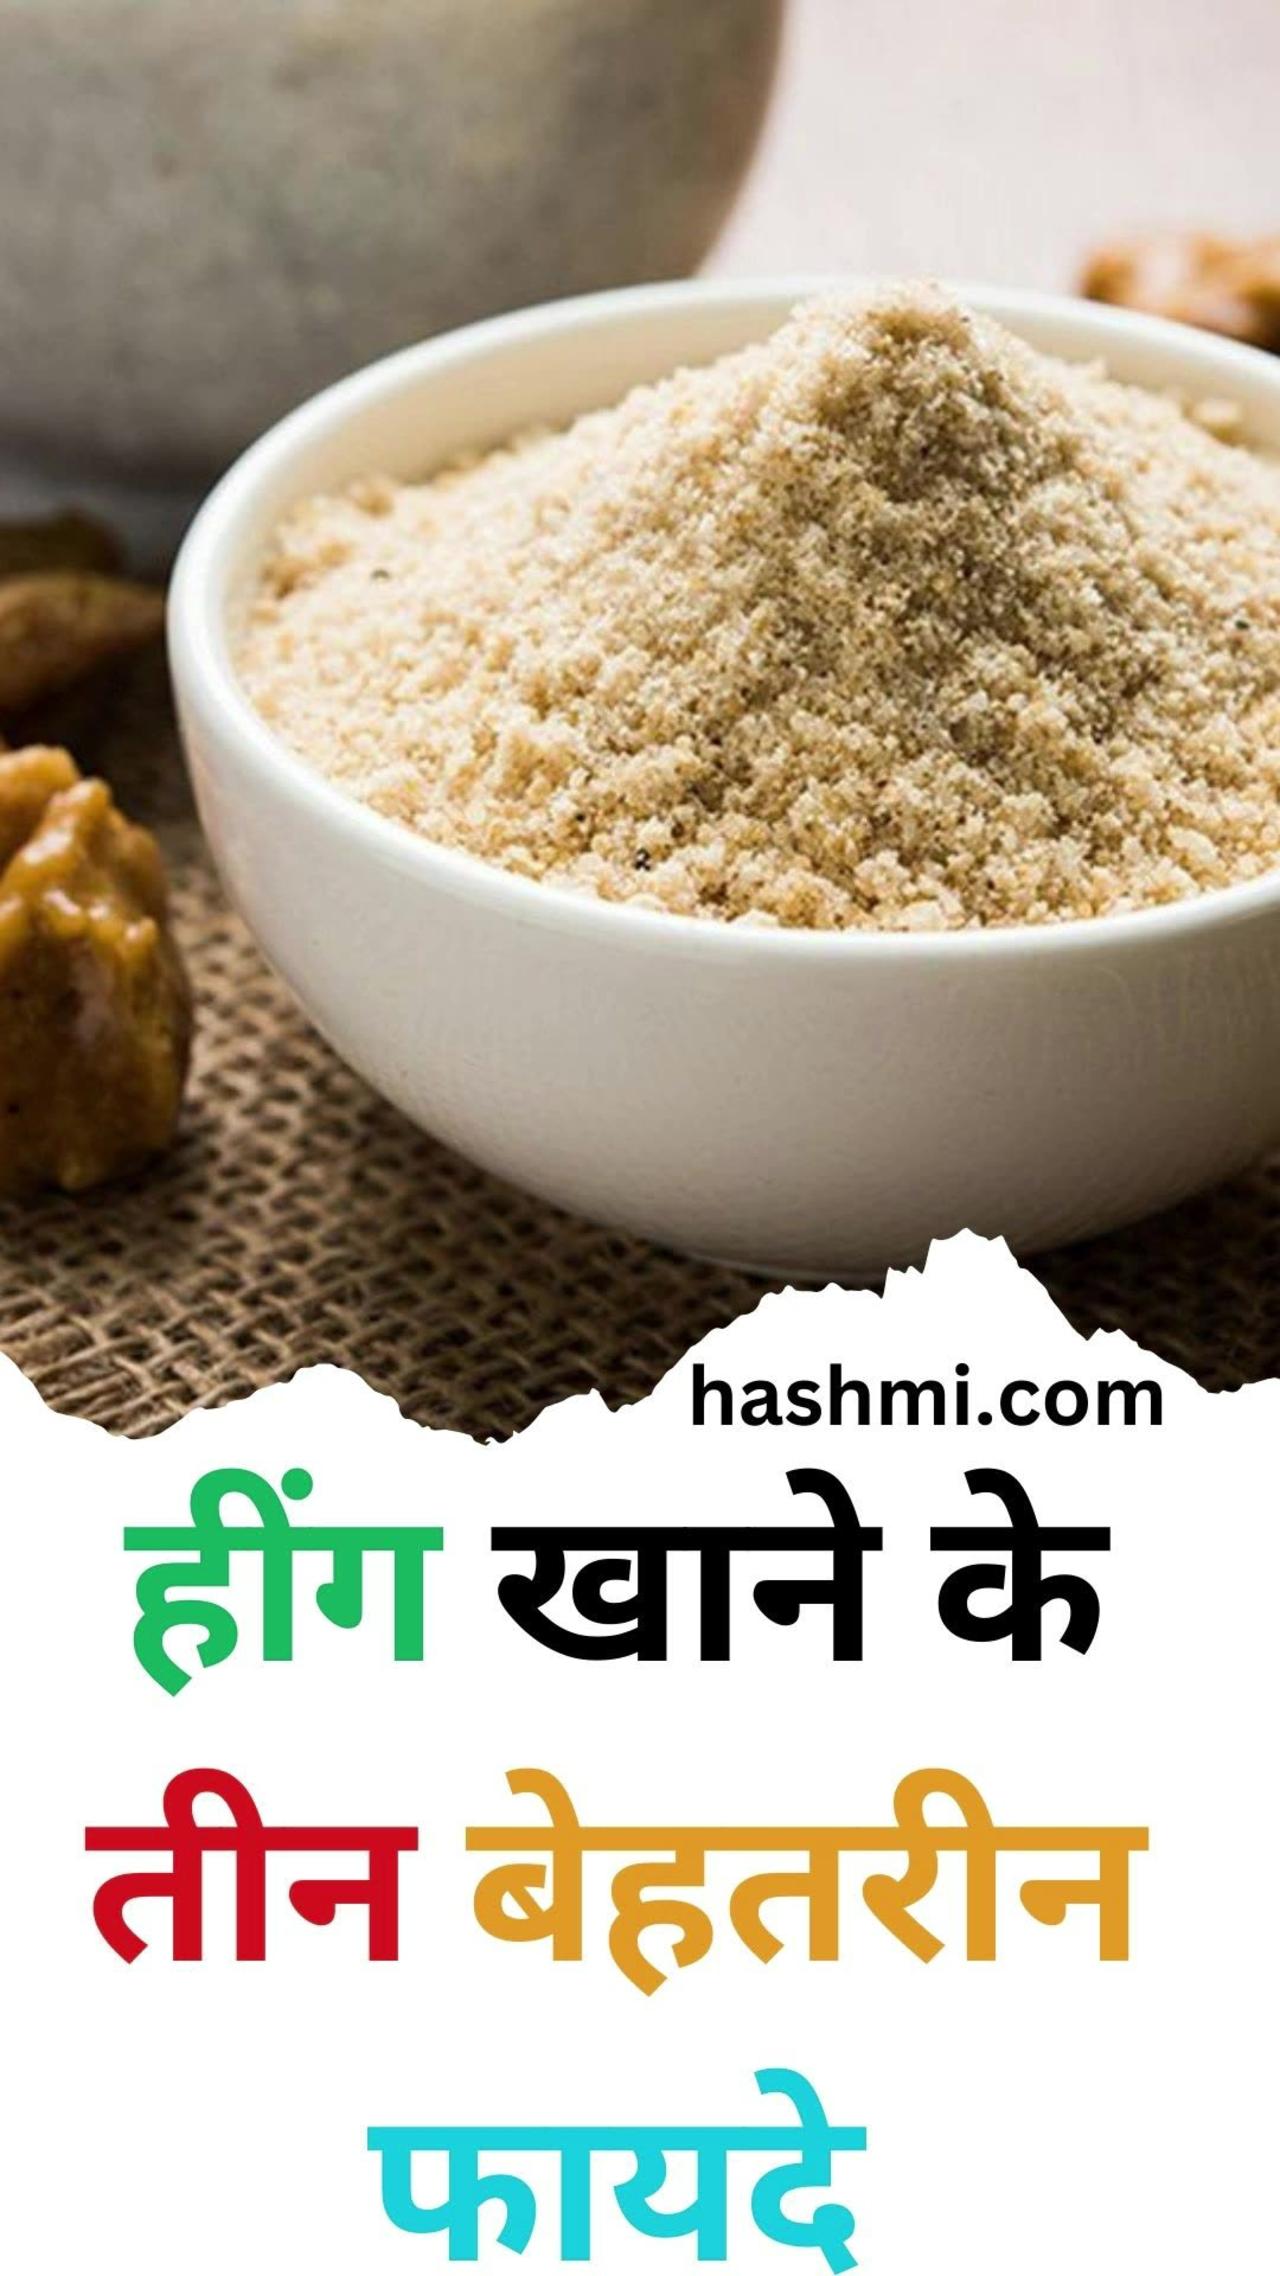 There are three great benefits of eating asafoetida